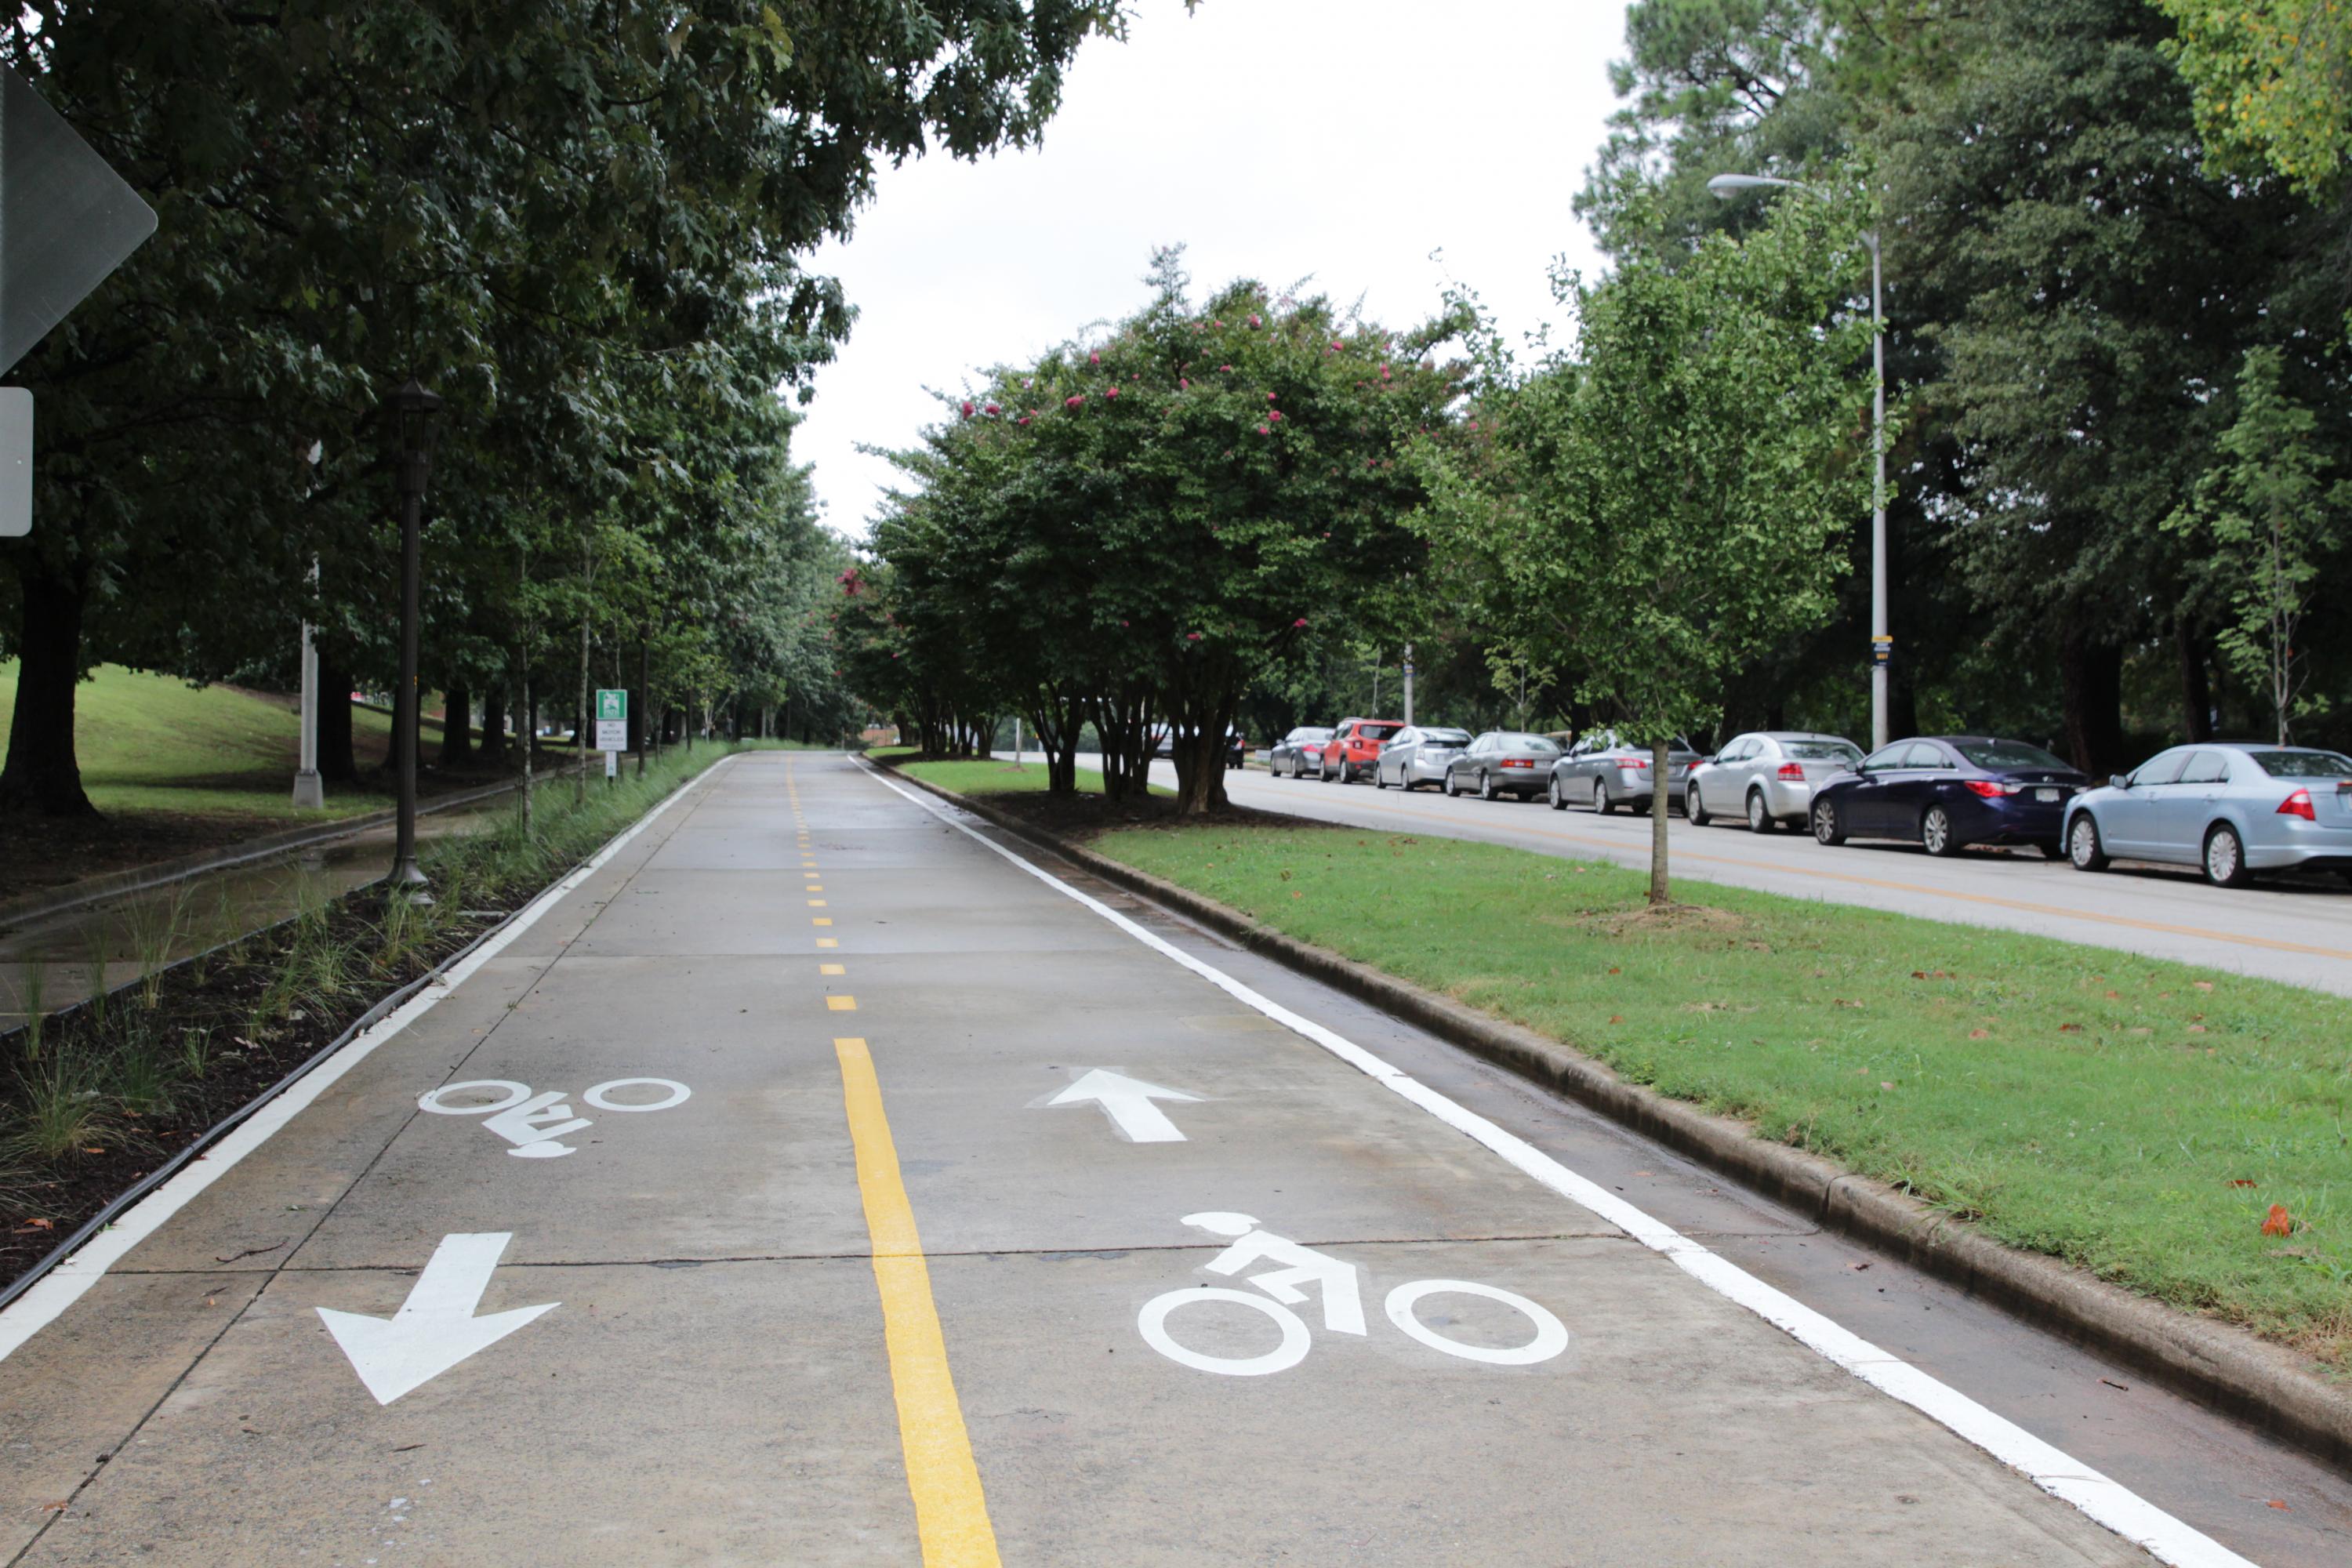 Striping designates direction for cyclists on the PATH Parkway